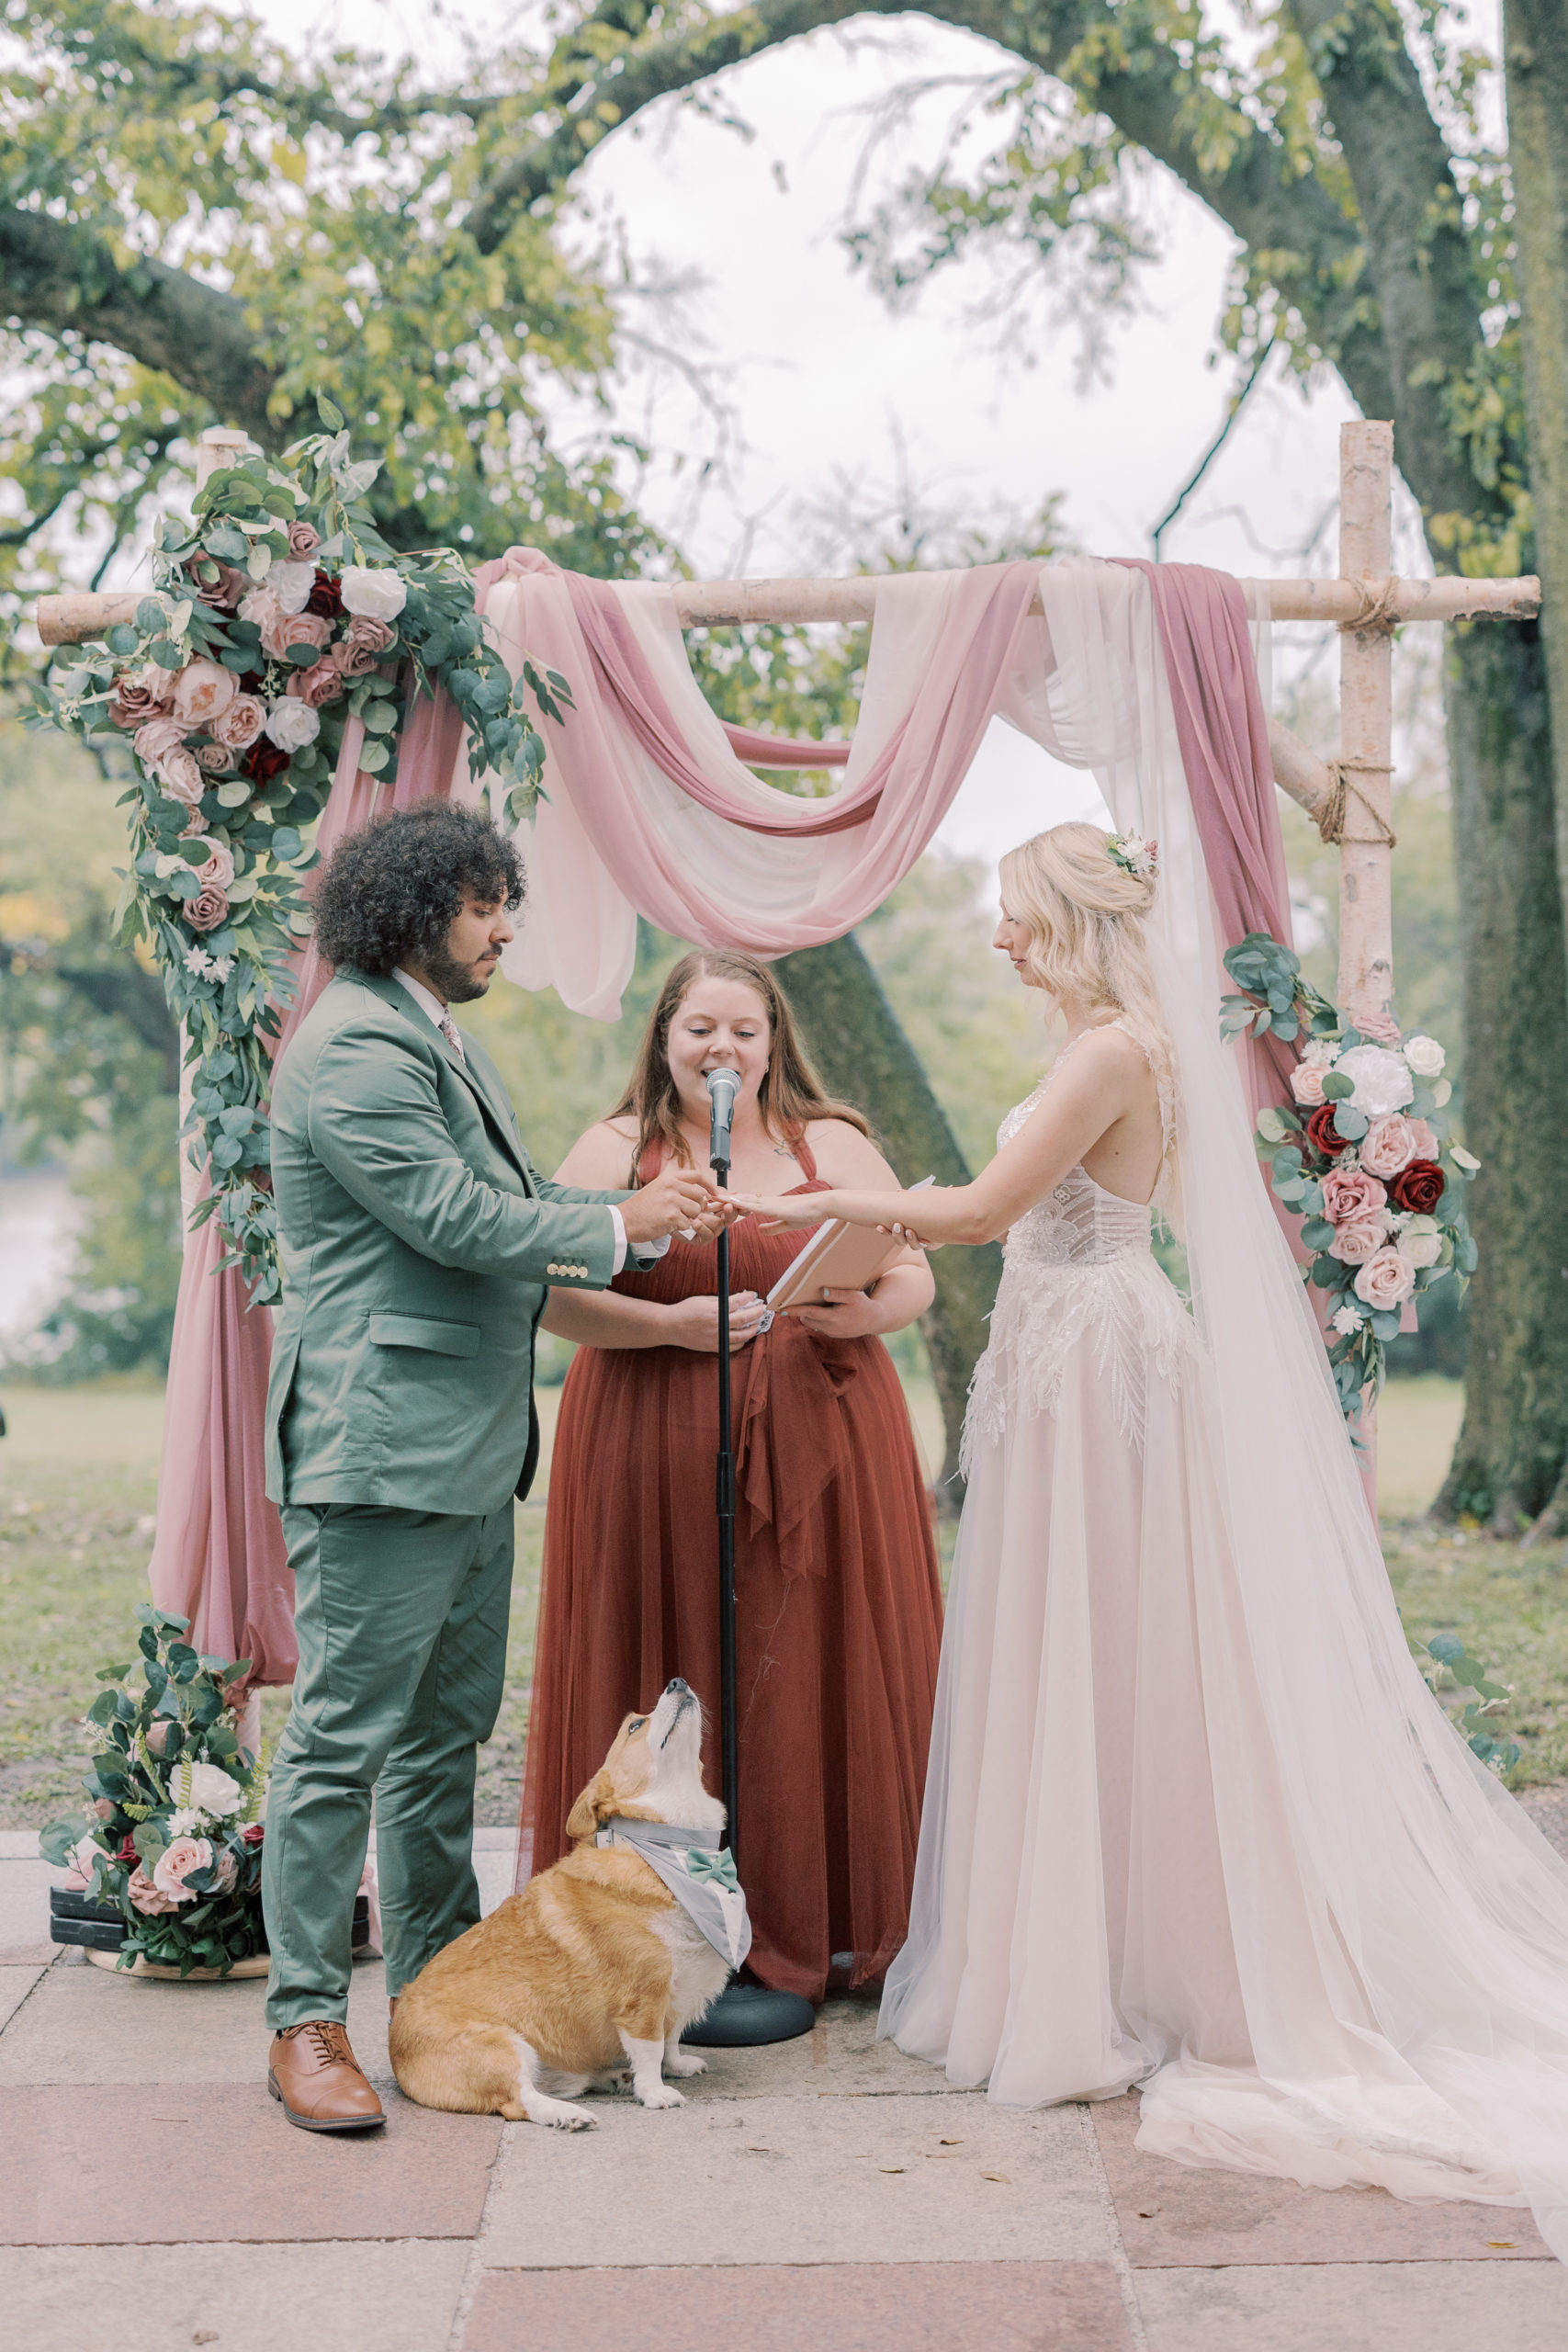 Should You Have An Unplugged Ceremony?